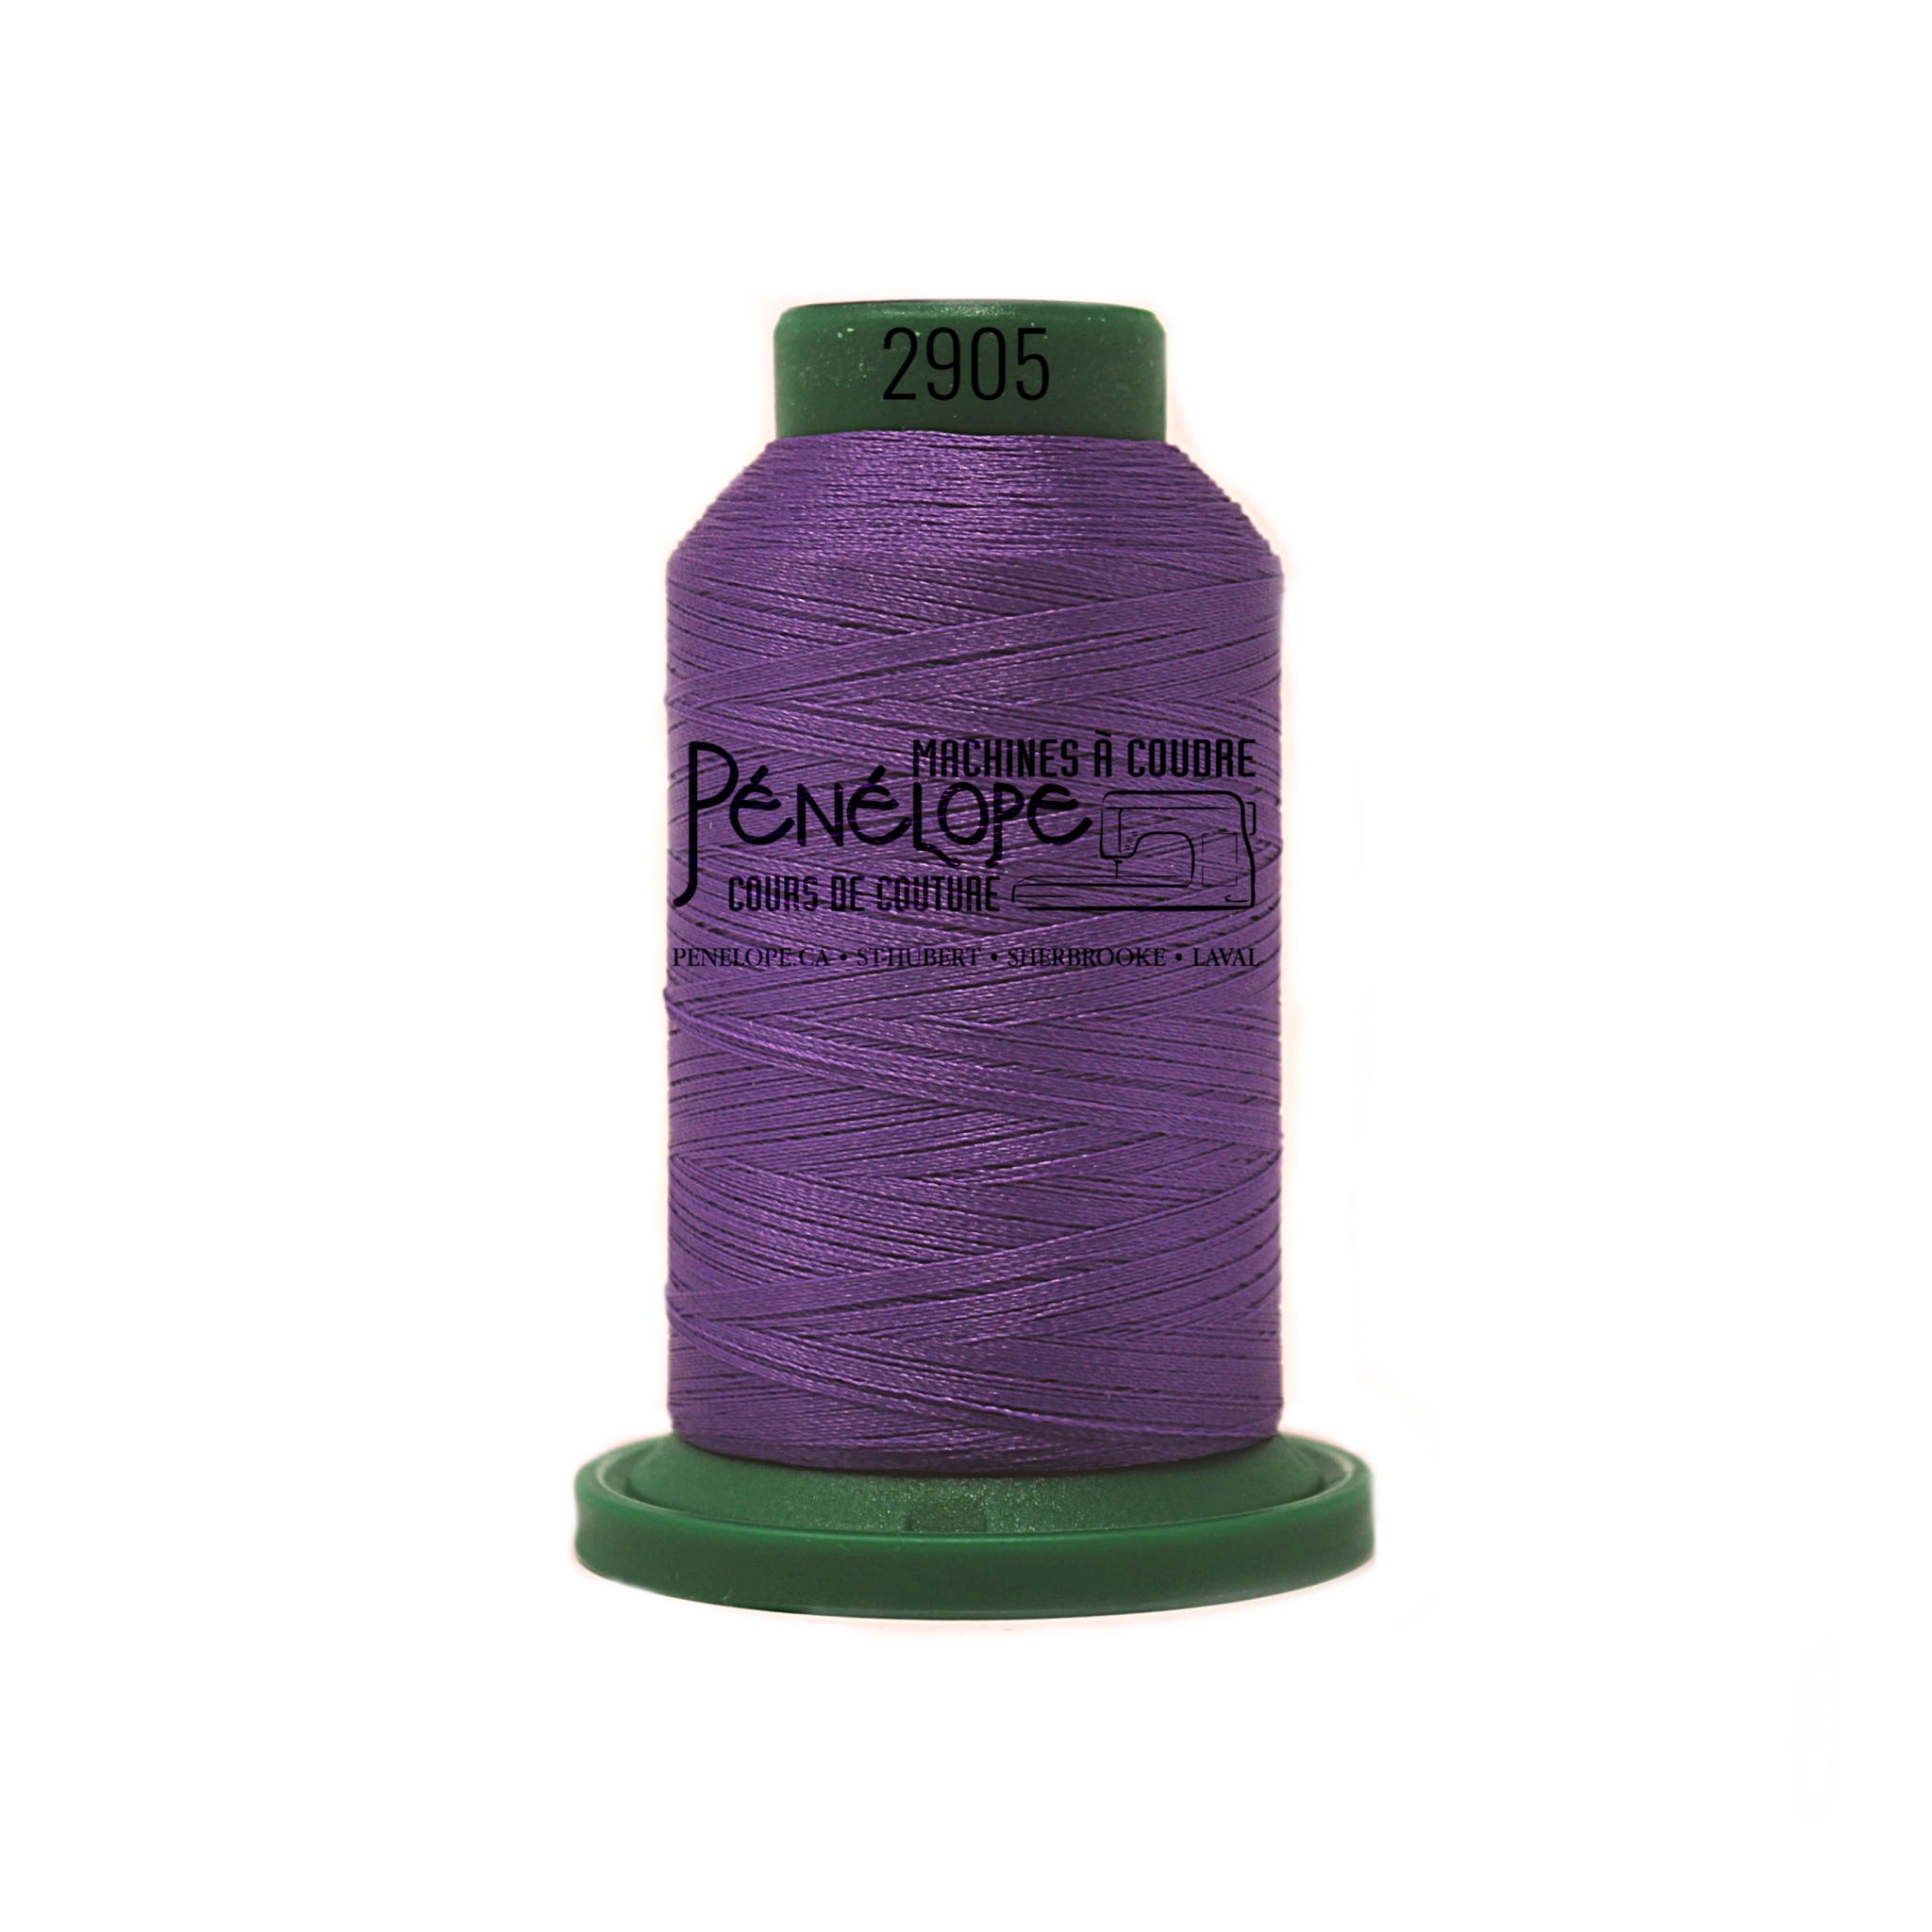 Isacord Isacord sewing and embroidery thread 2905